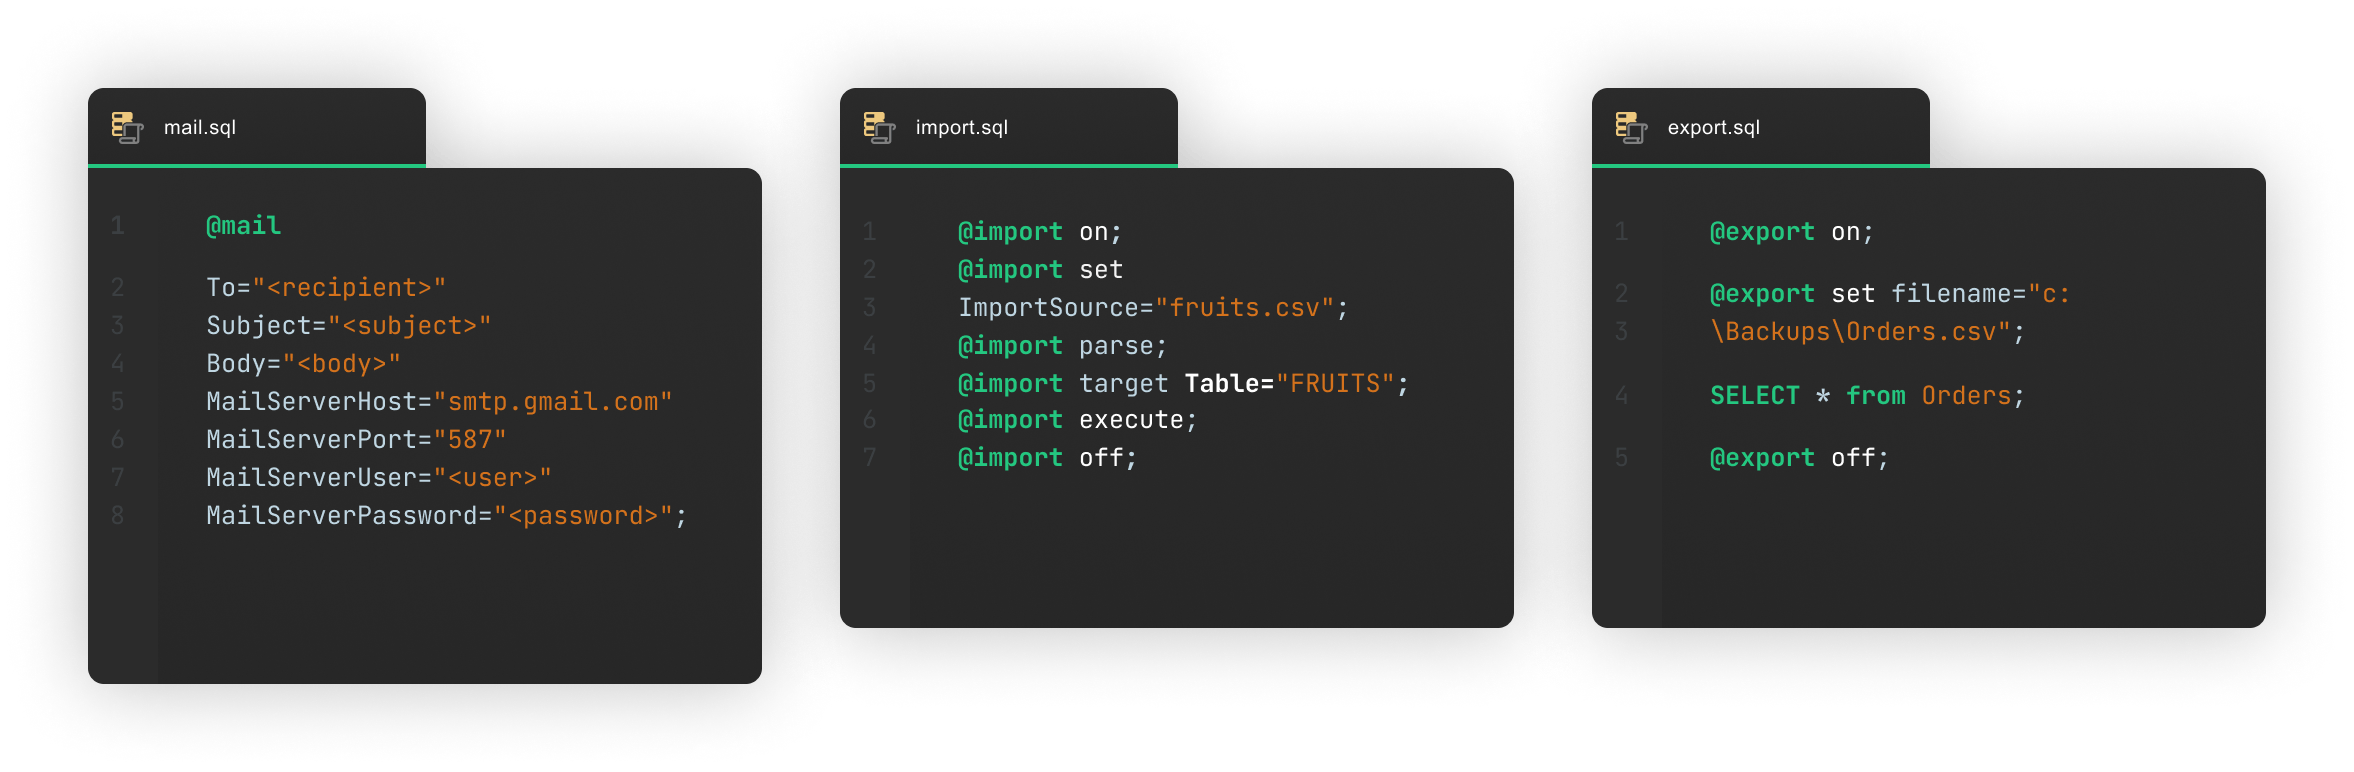 Client-side commands Execute imports, exports or even emailing directly from your code.